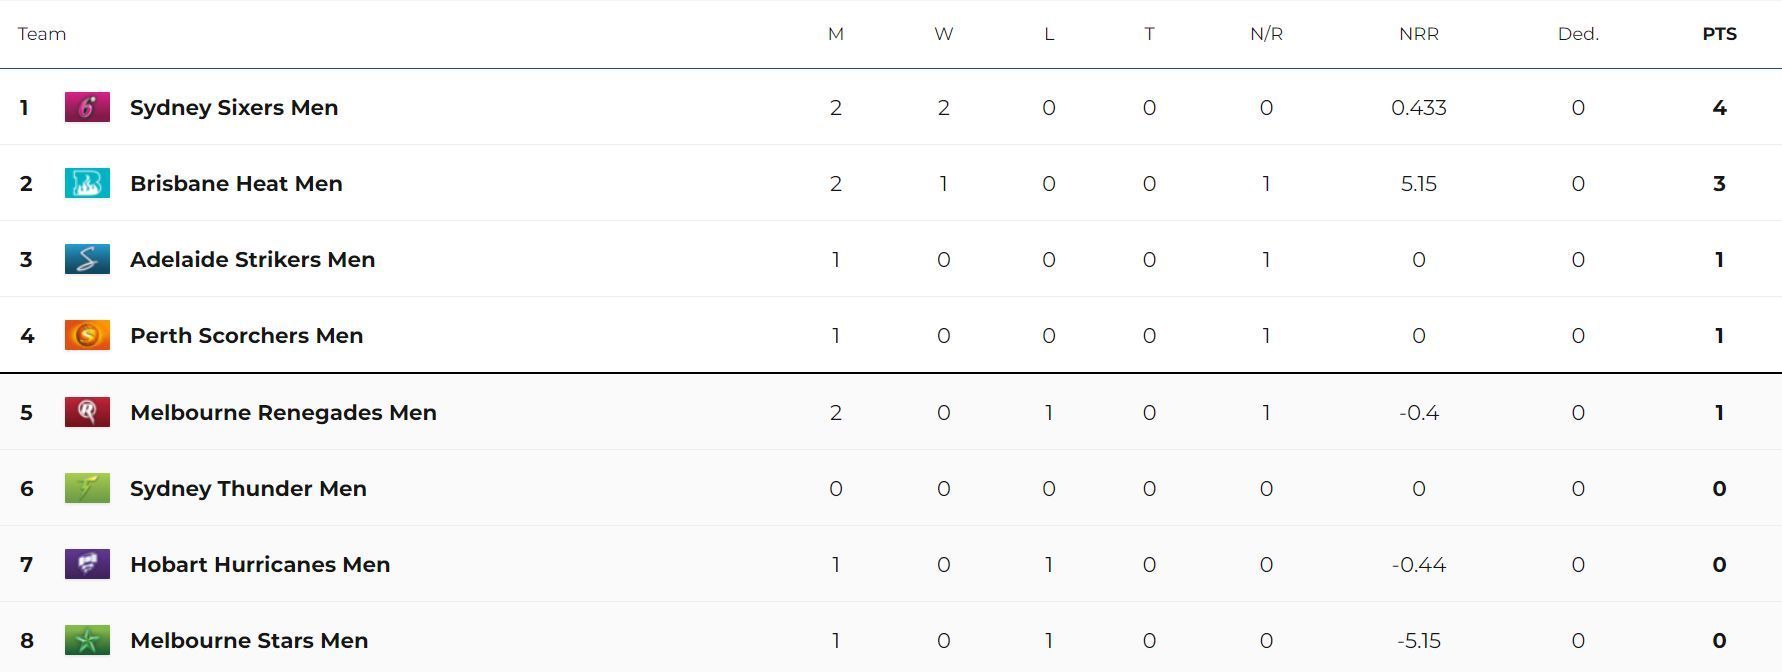 Updated Points Table after Match 5 (Image Courtesy: cricket.com.au)